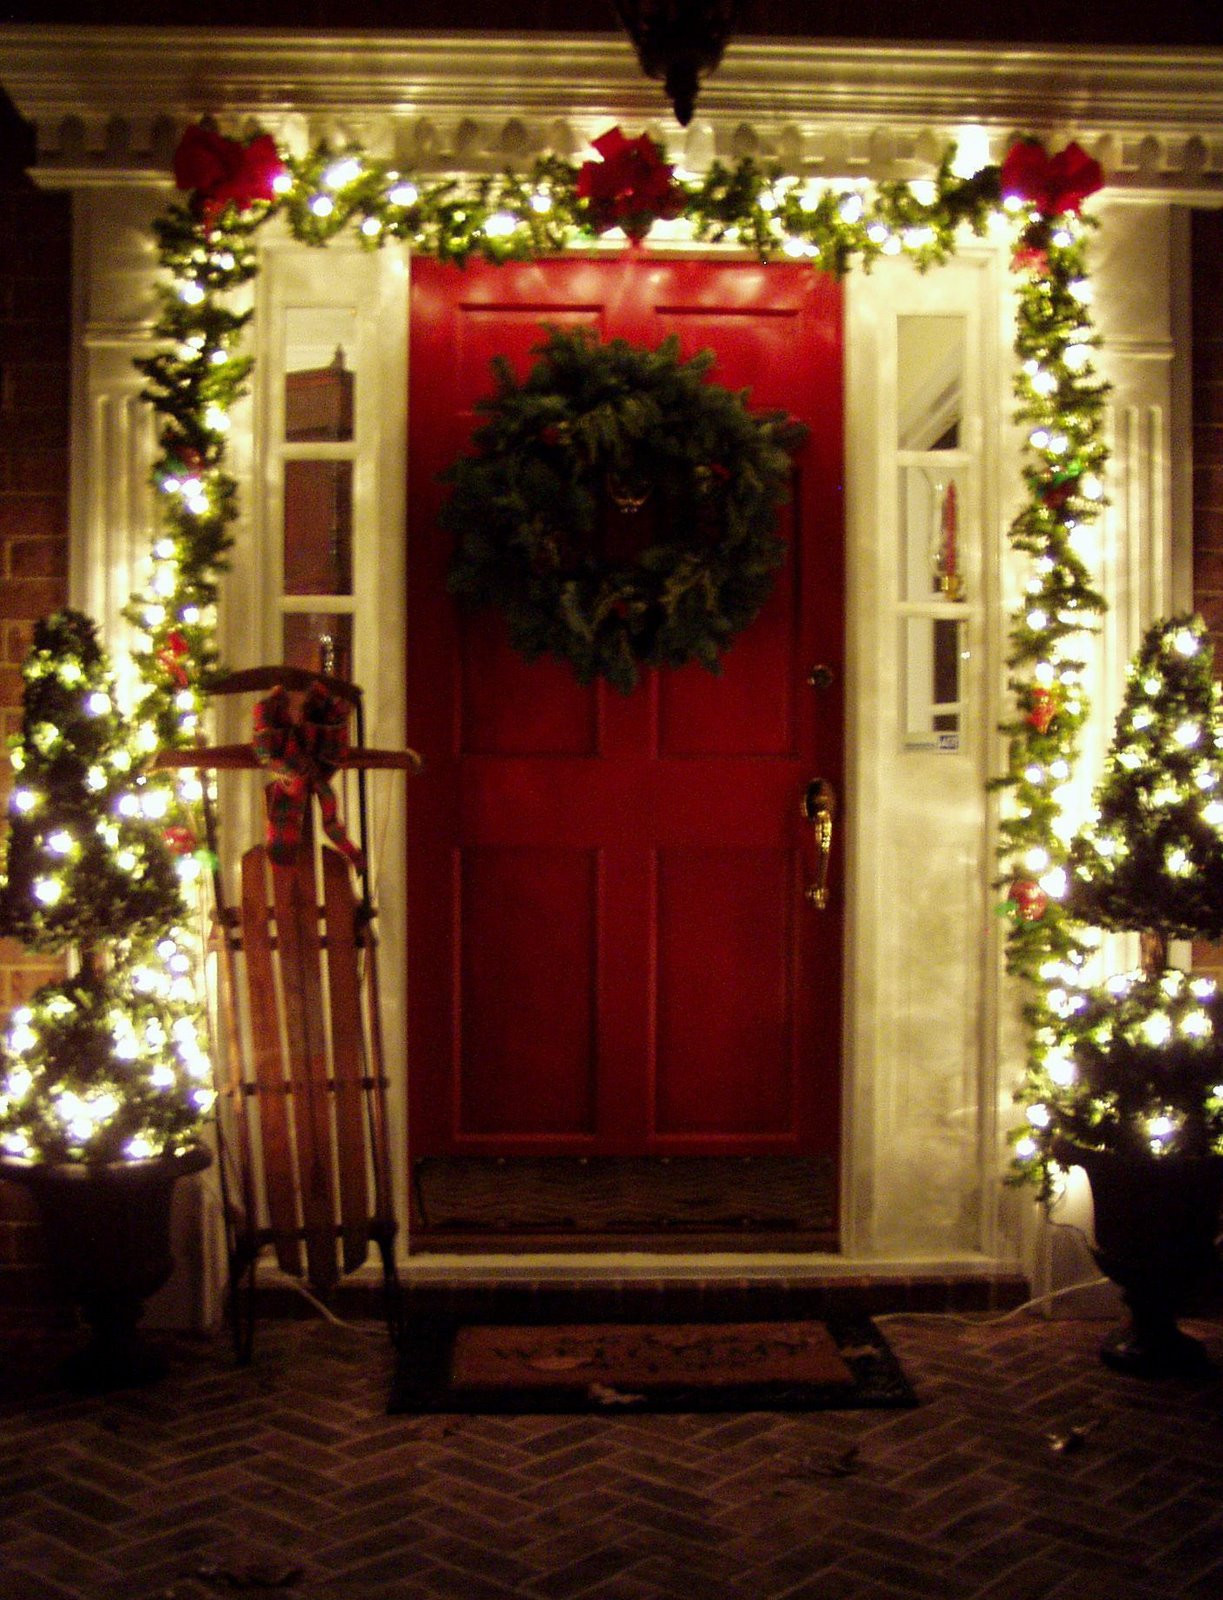 Christmas Decorated Porch
 Decorating the Front Porch for Christmas 2008